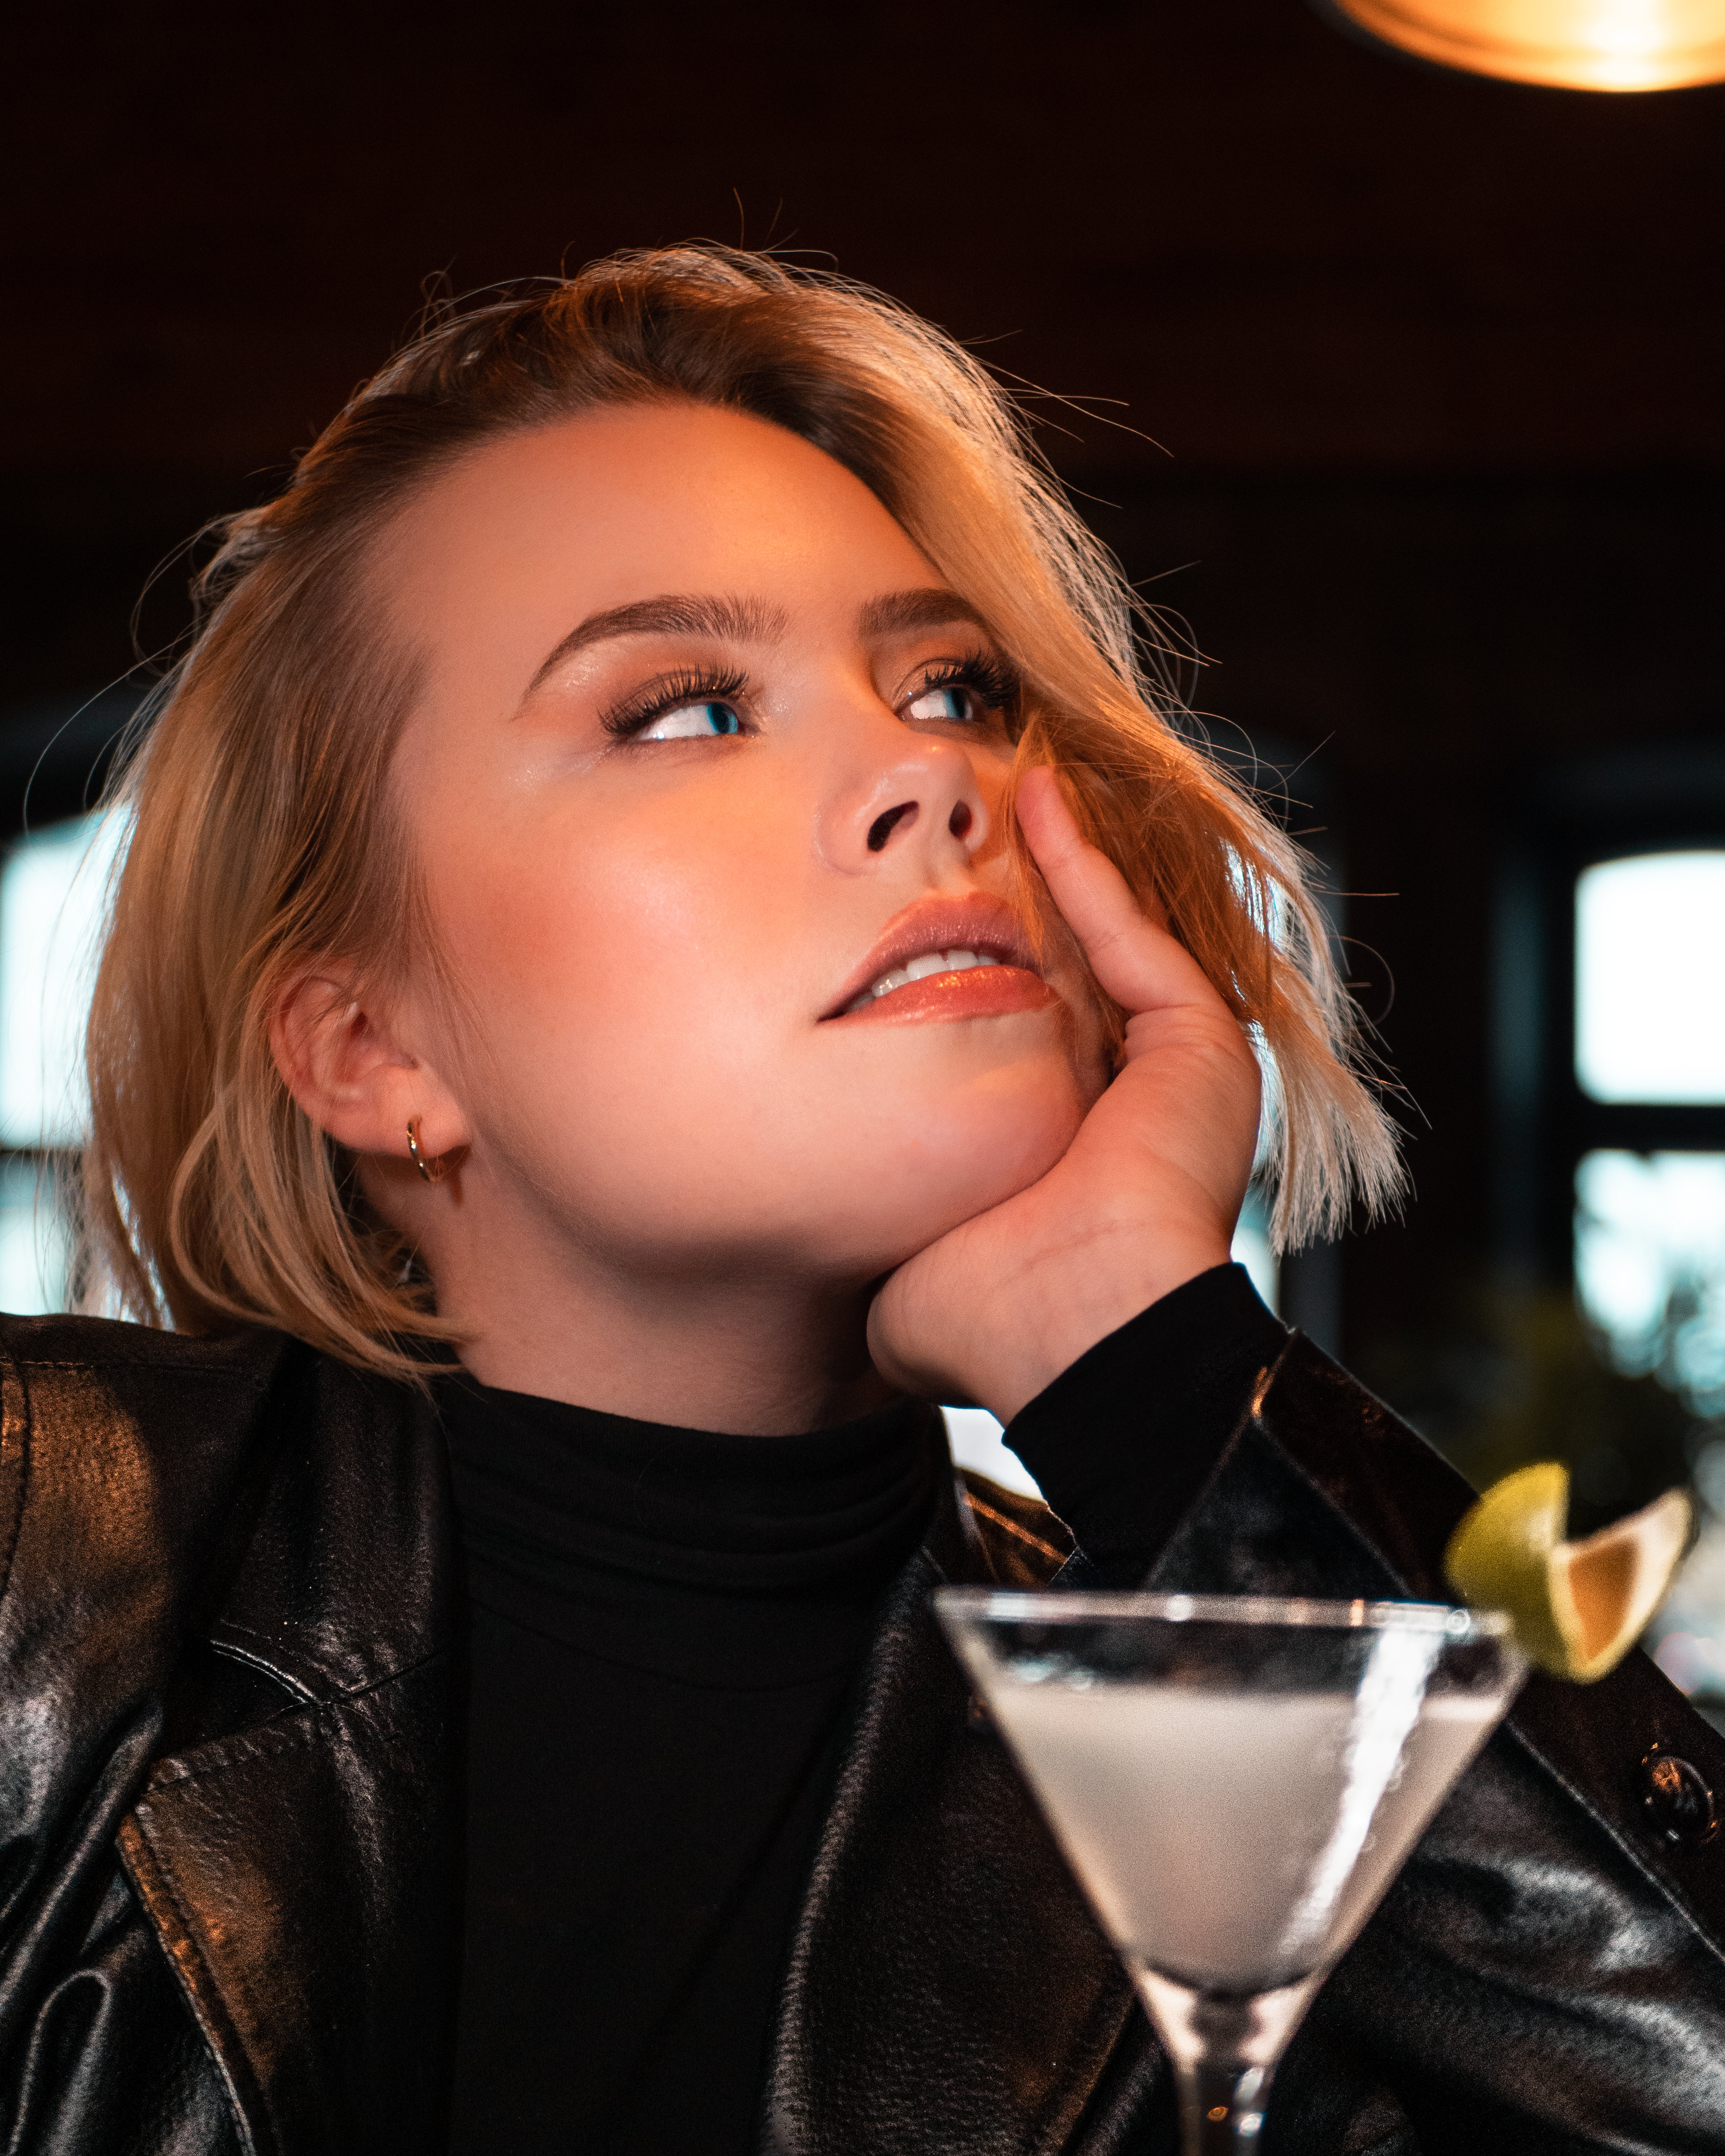 Blonde woman with blue eyes is holding a drink and she is looking away from the camera and seems to be in deep thought. She is wearing a black leather jacket.